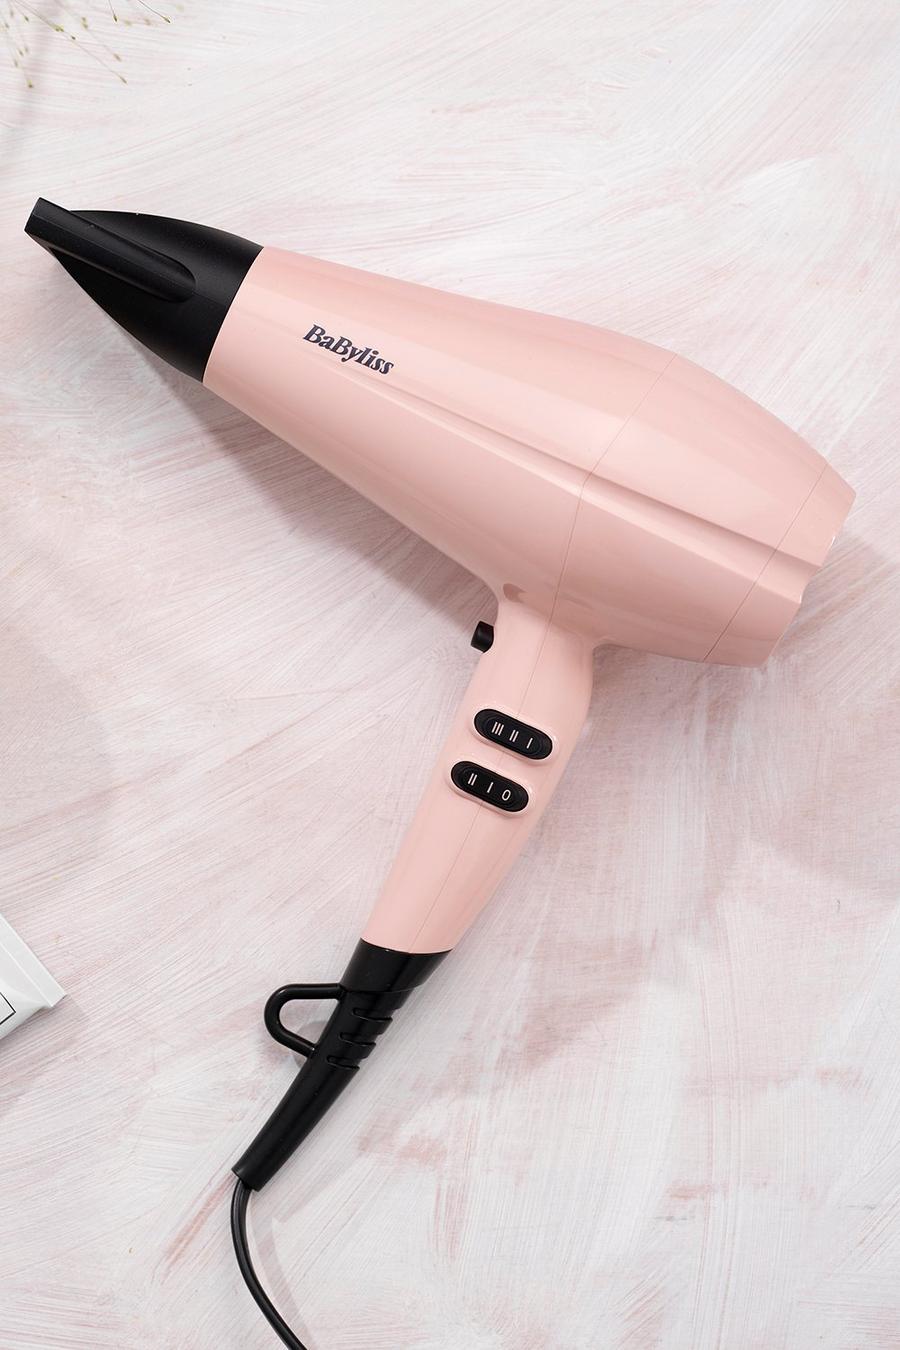 Babyliss - Sèche-cheveux, Rose image number 1